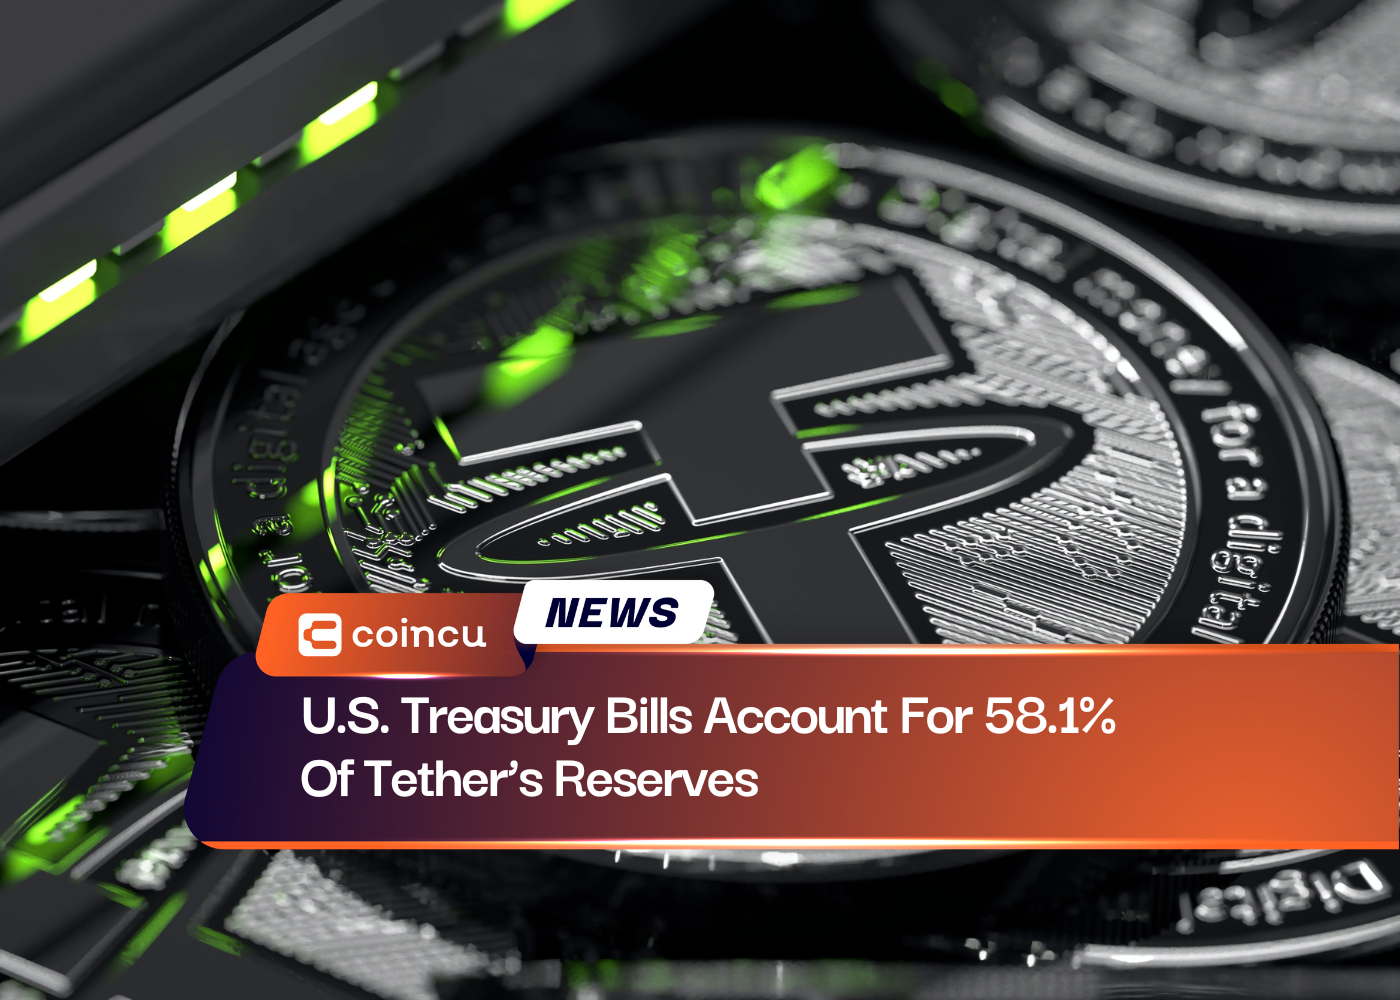 U.S. Treasury Bills Account For 58.1% Of Tether’s Reserves